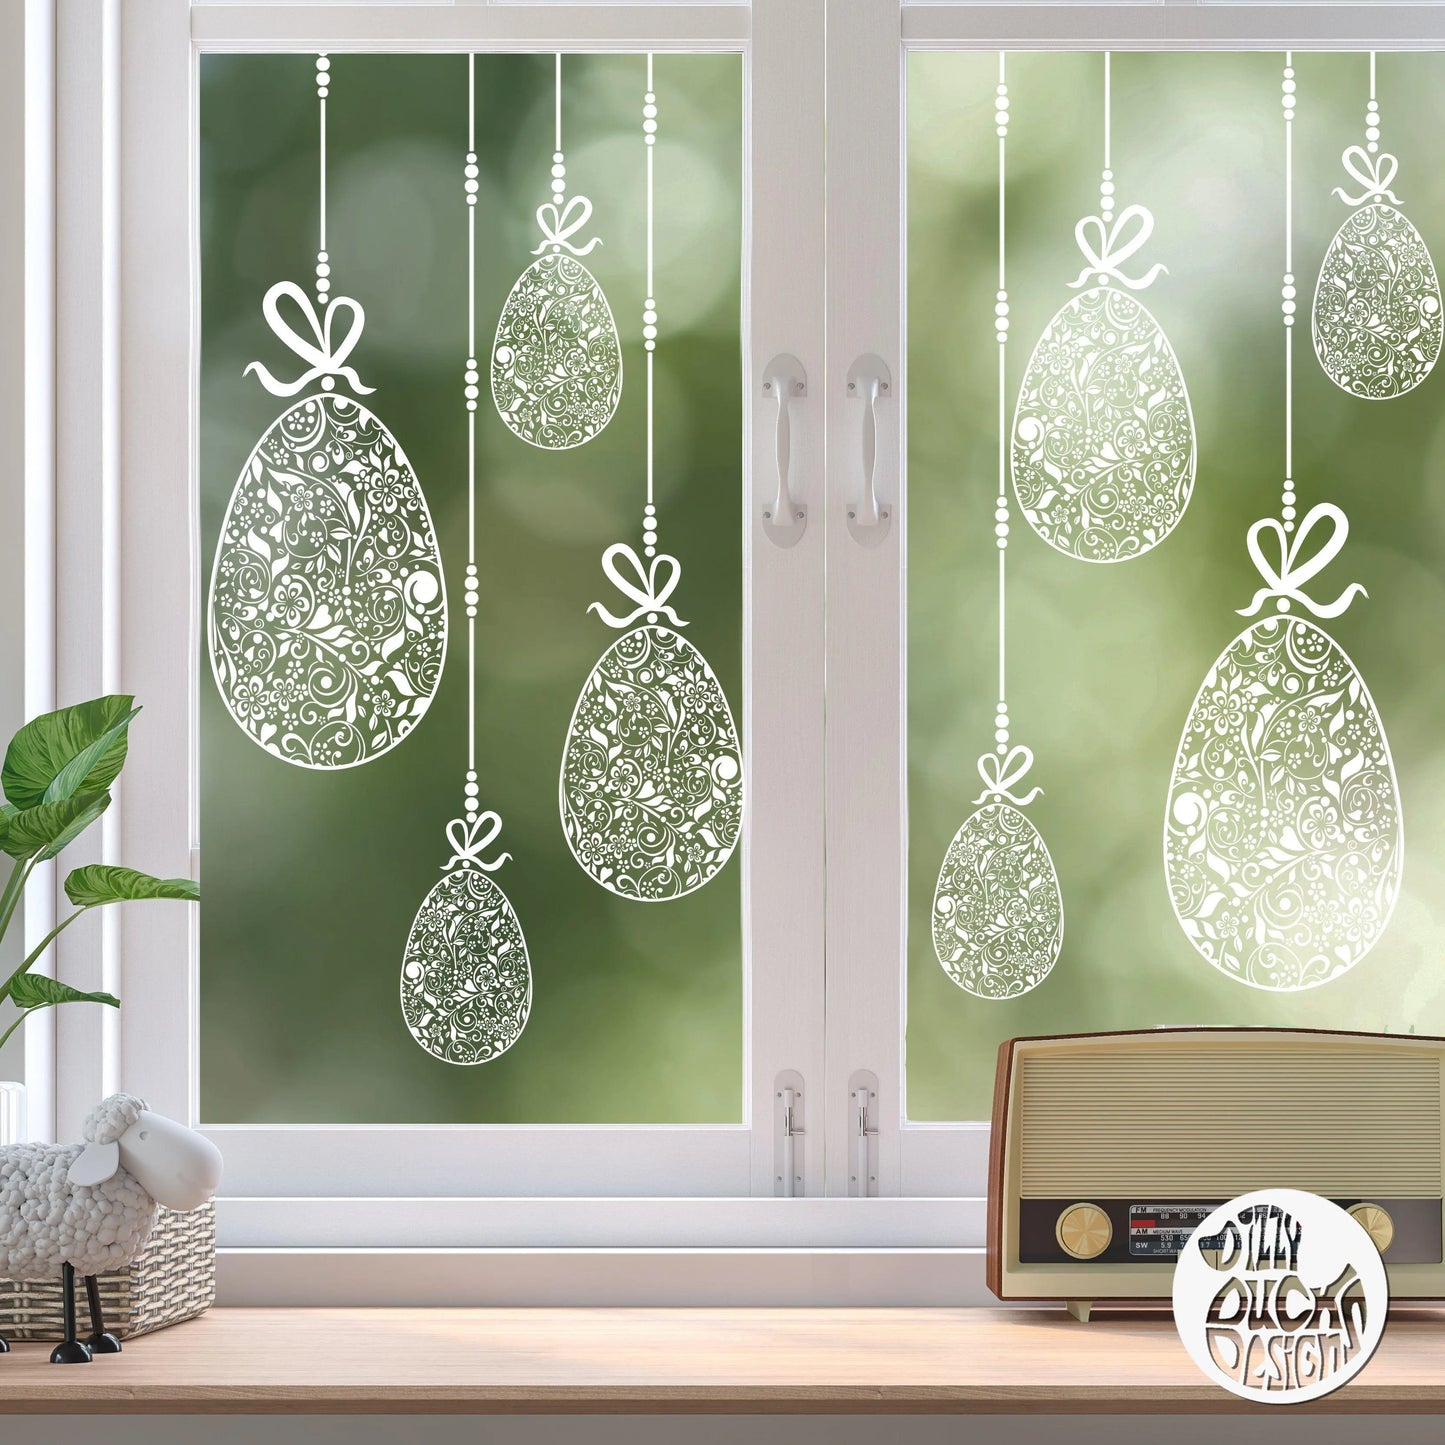 Decal 10 x Floral Easter Egg Window Decals - Clear Dizzy Duck Designs